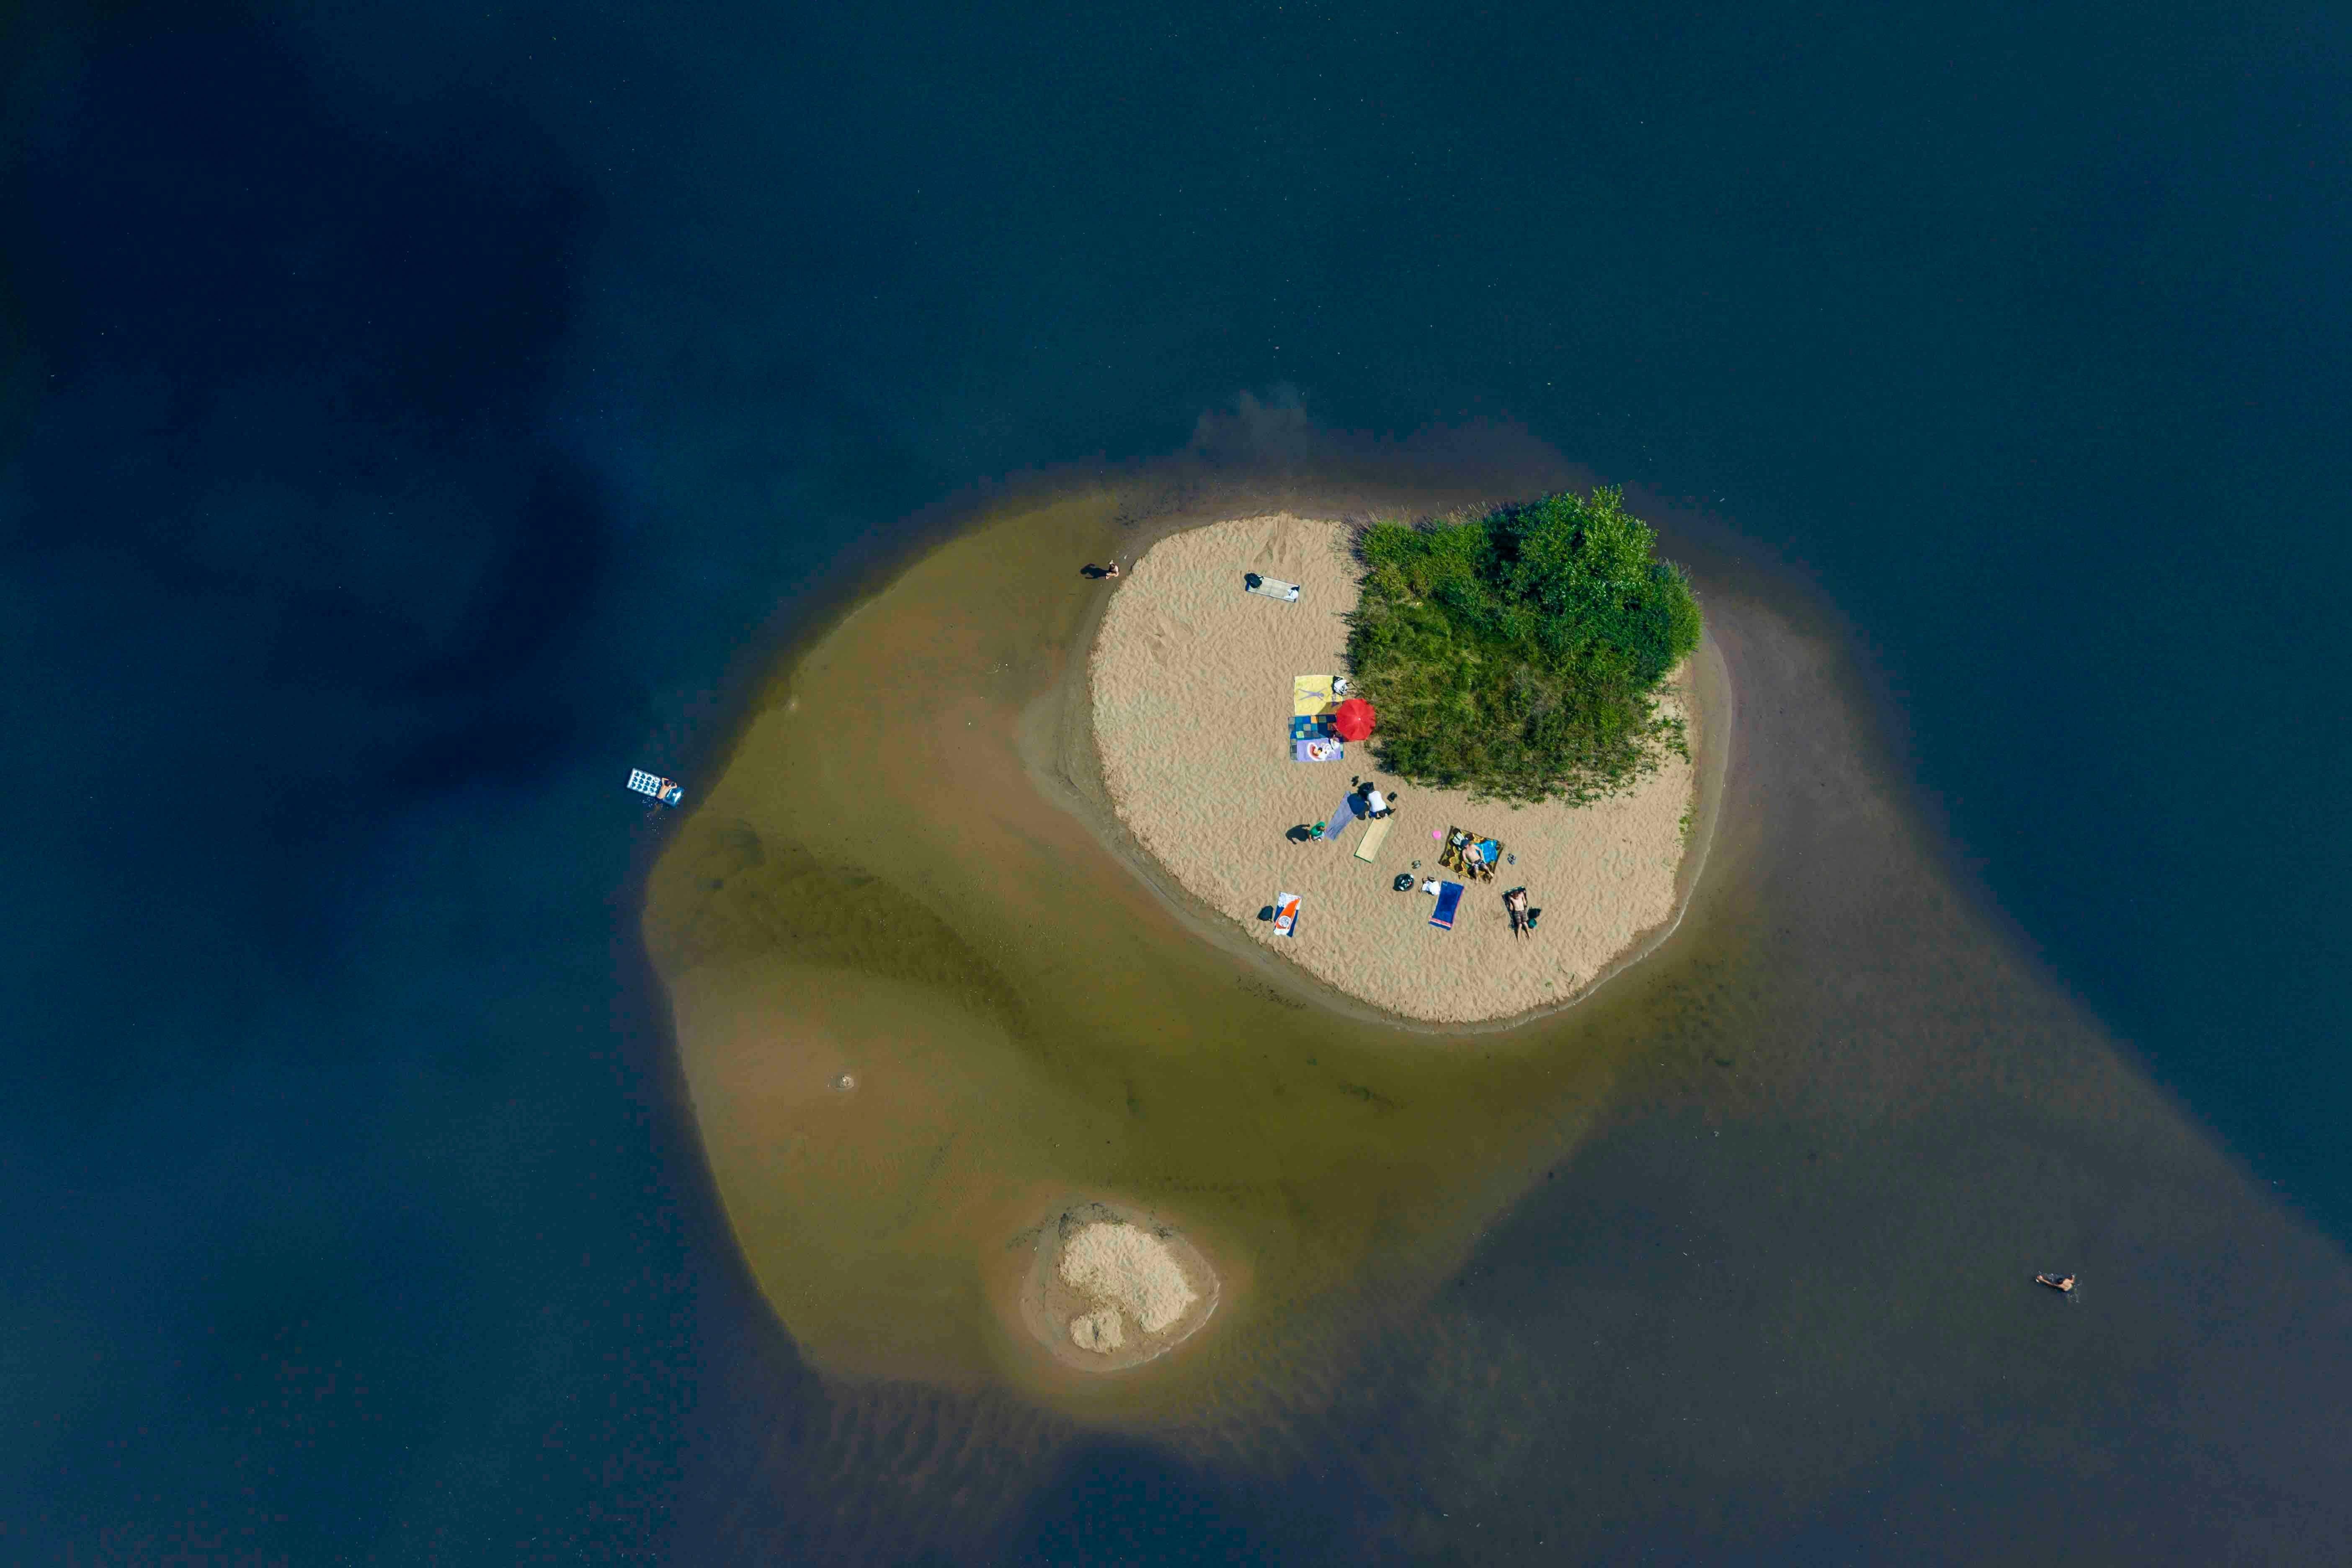 Klaus Leidorf Color Photograph - Our own private island